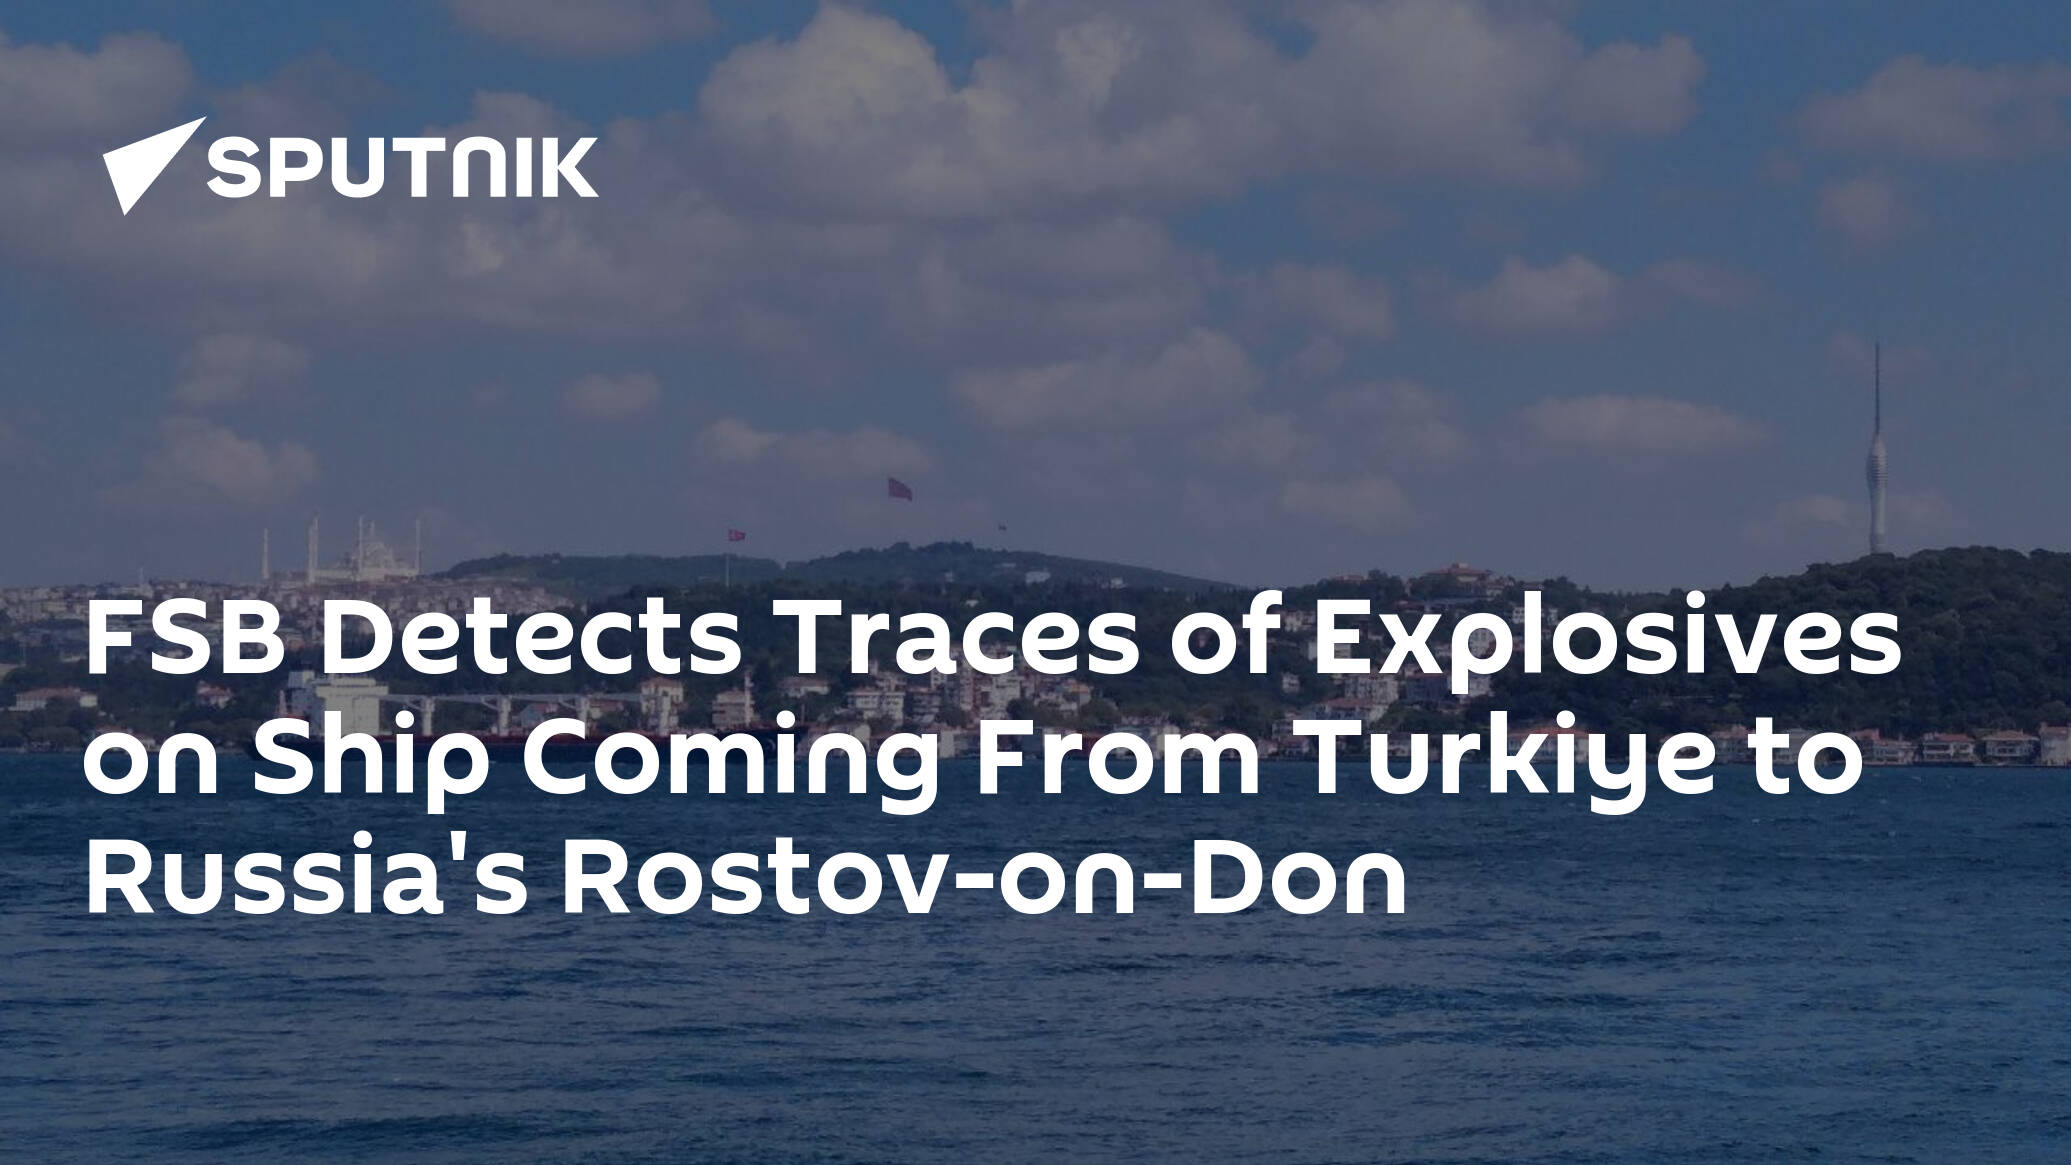 FSB Detects Traces of Explosives on Ship Coming From Turkiye to Russia's Rostov-on-Don